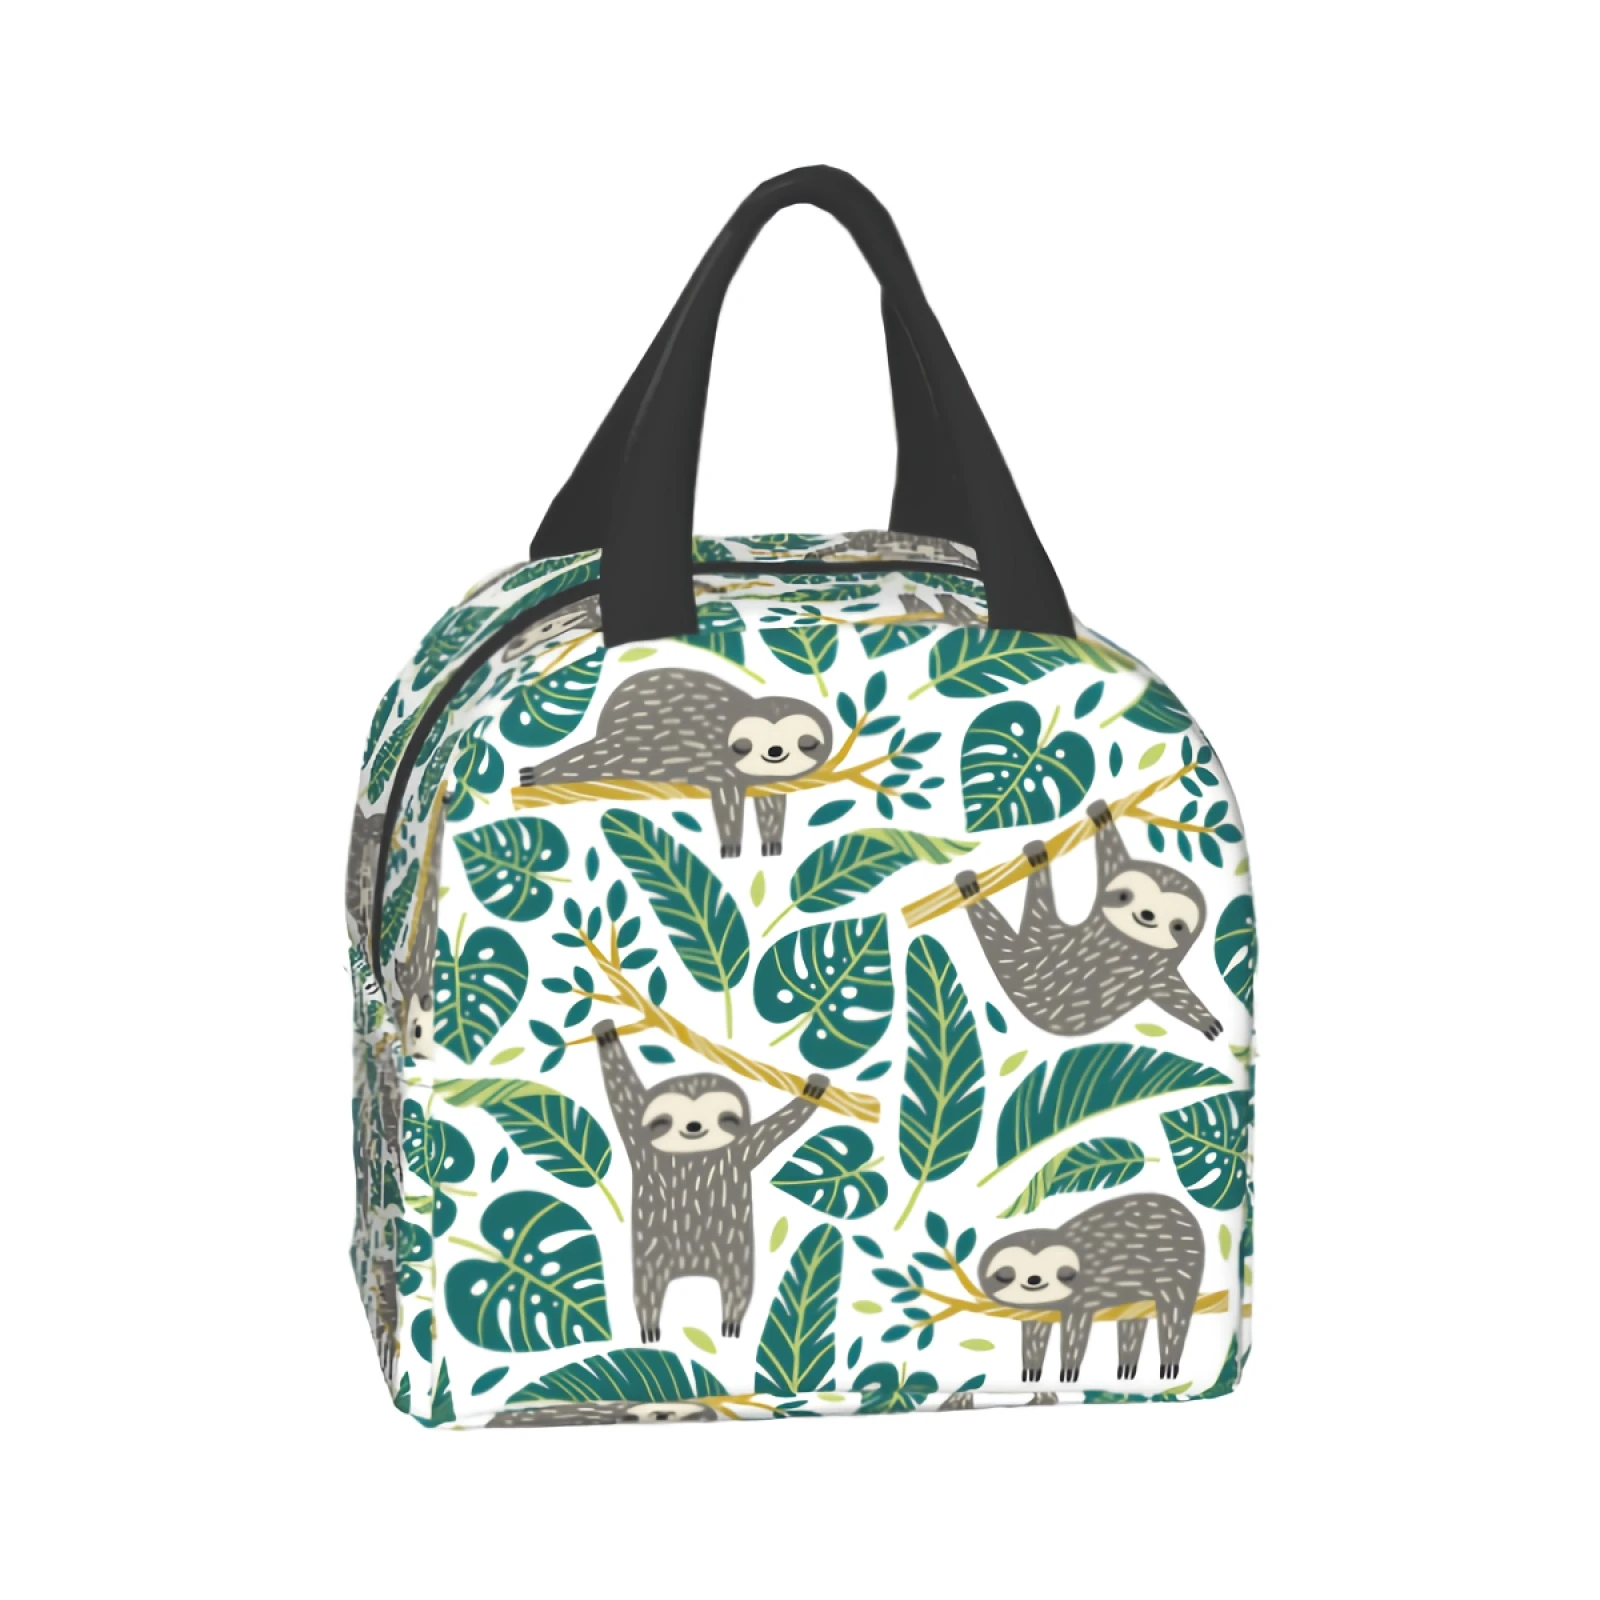 

Sloth Palm Tree Leaf Portable Insulated Lunch Bag Waterproof Cute Animal Hanging In The Trees Tote Bento Bag Lunch Tote Imiss